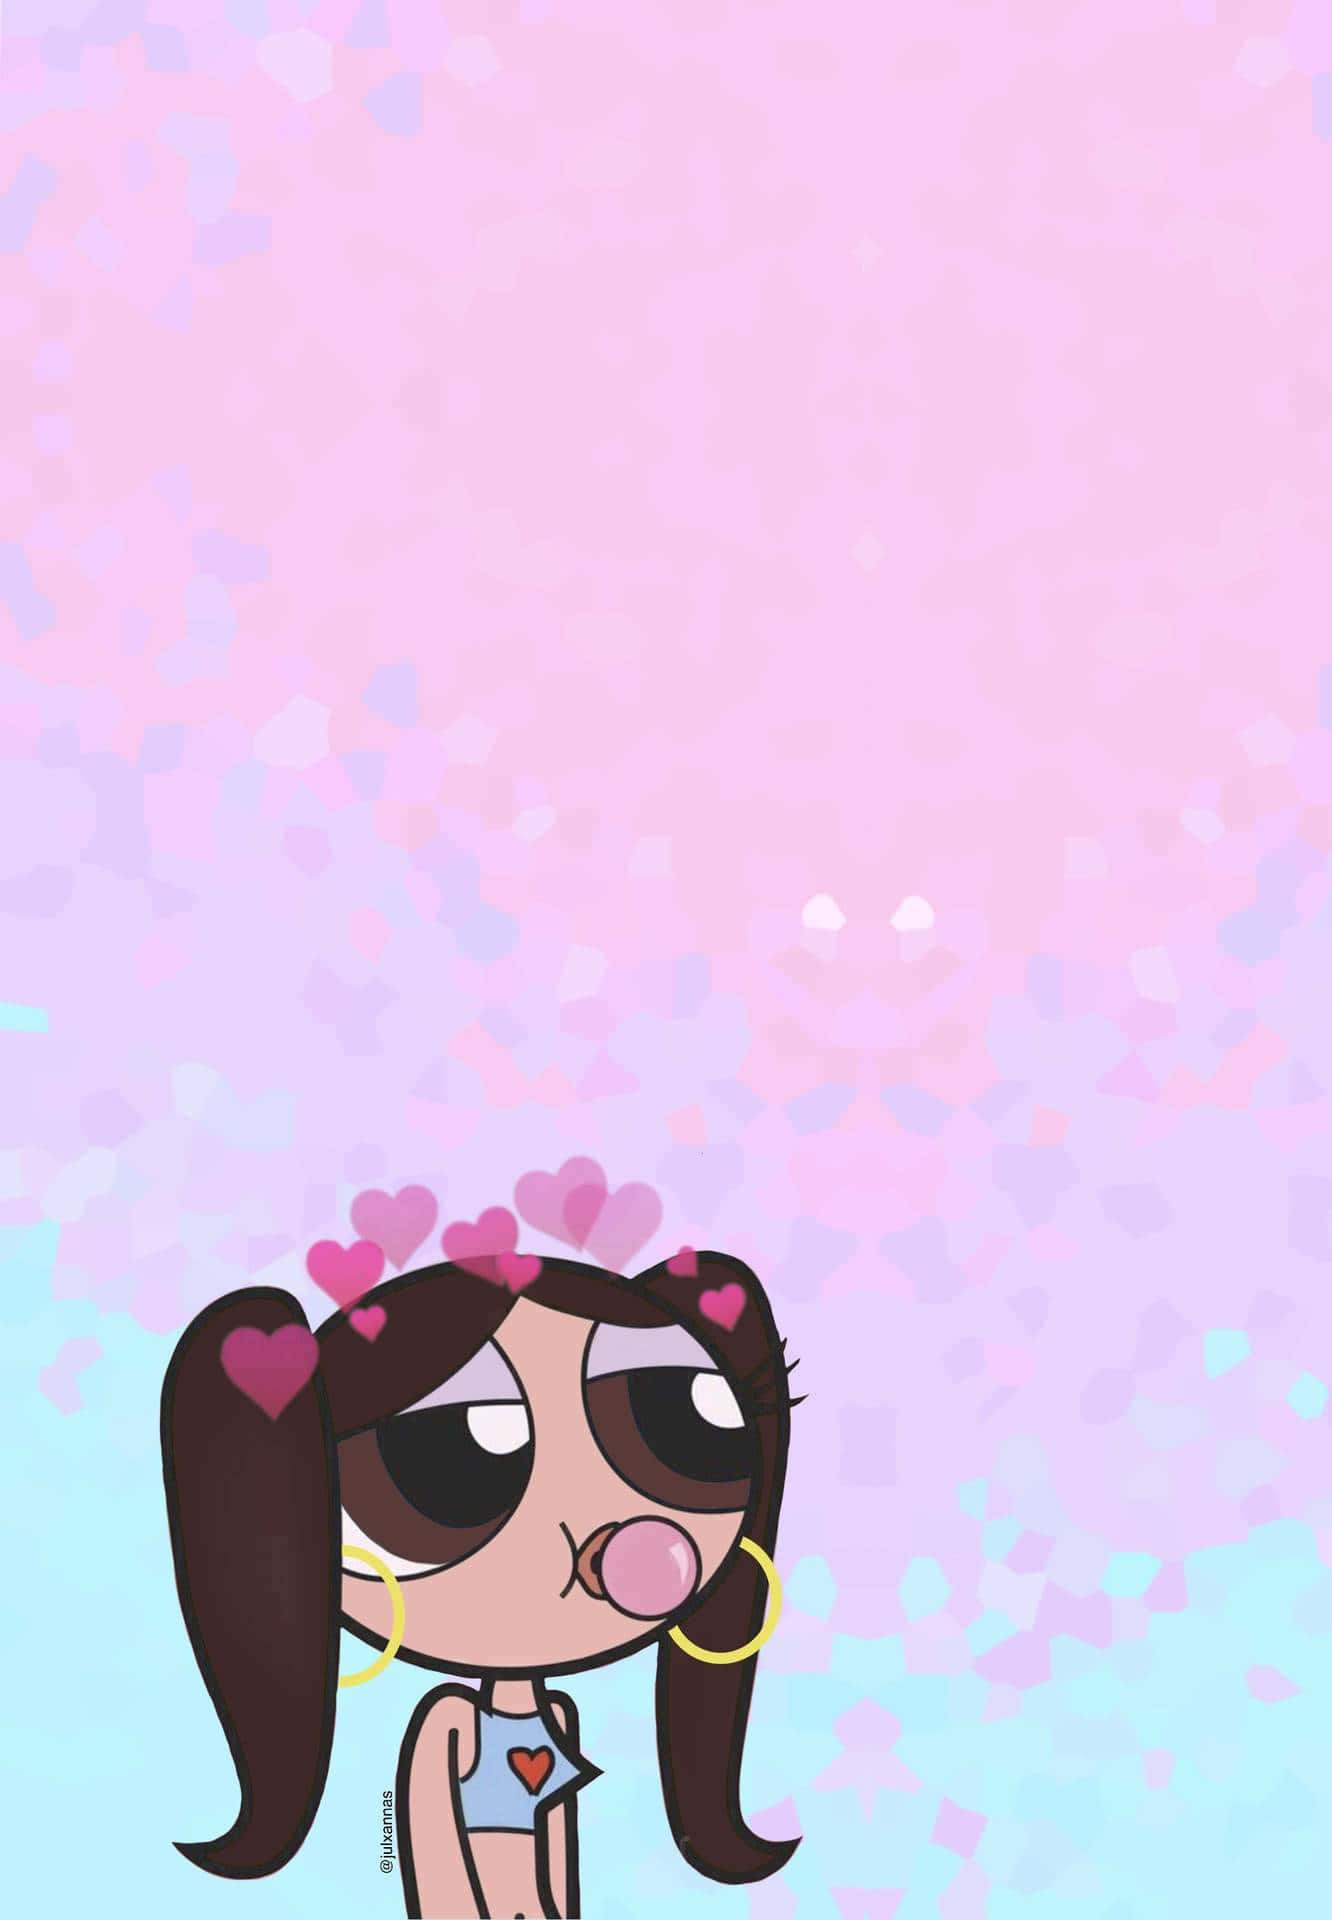 A Cartoon Girl With A Pink Bow In Her Hair